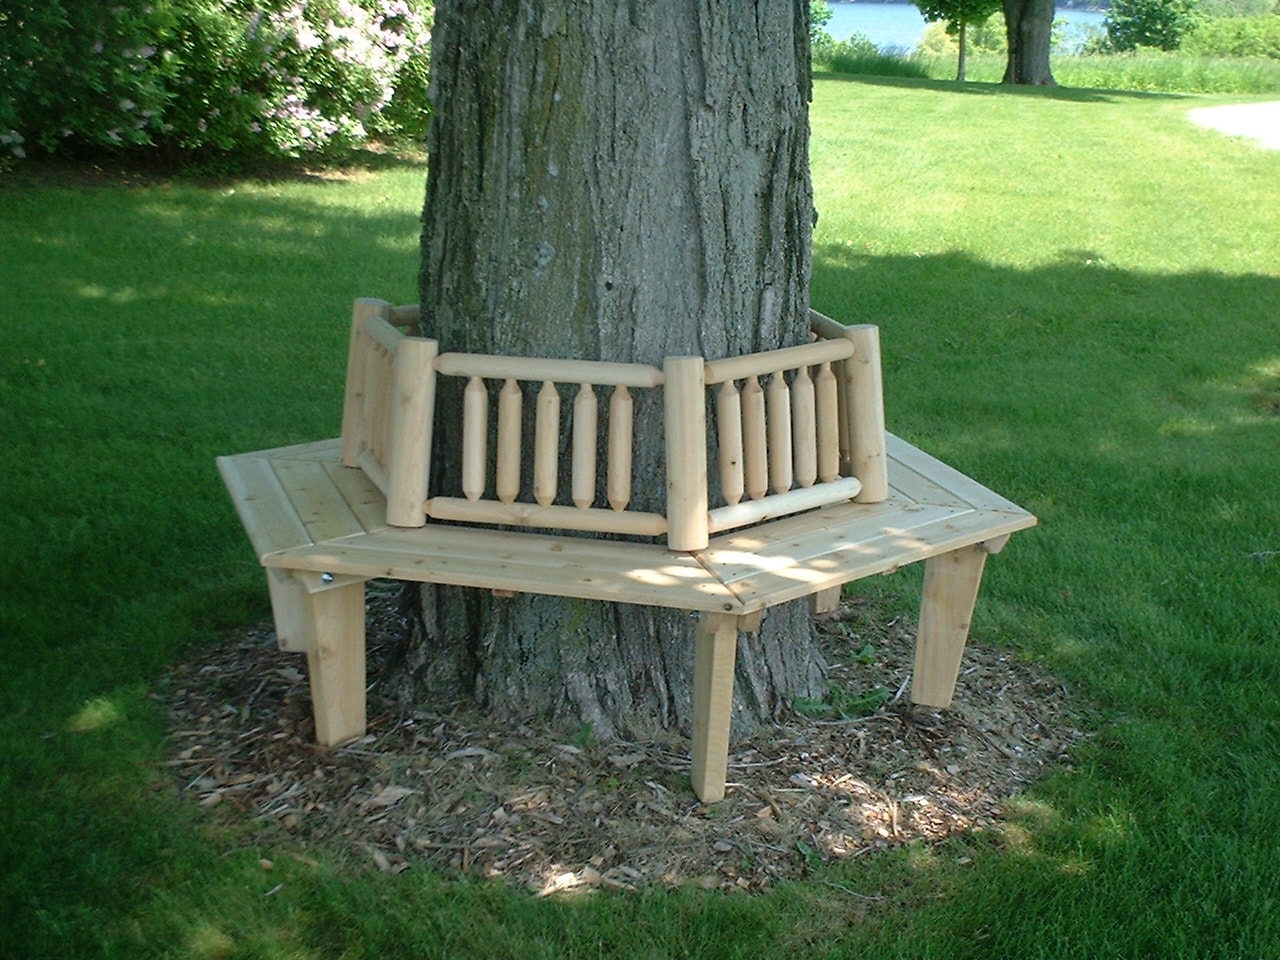 Large Cedar Adirondack Tree Bench with Back - Free Shipping Today ...